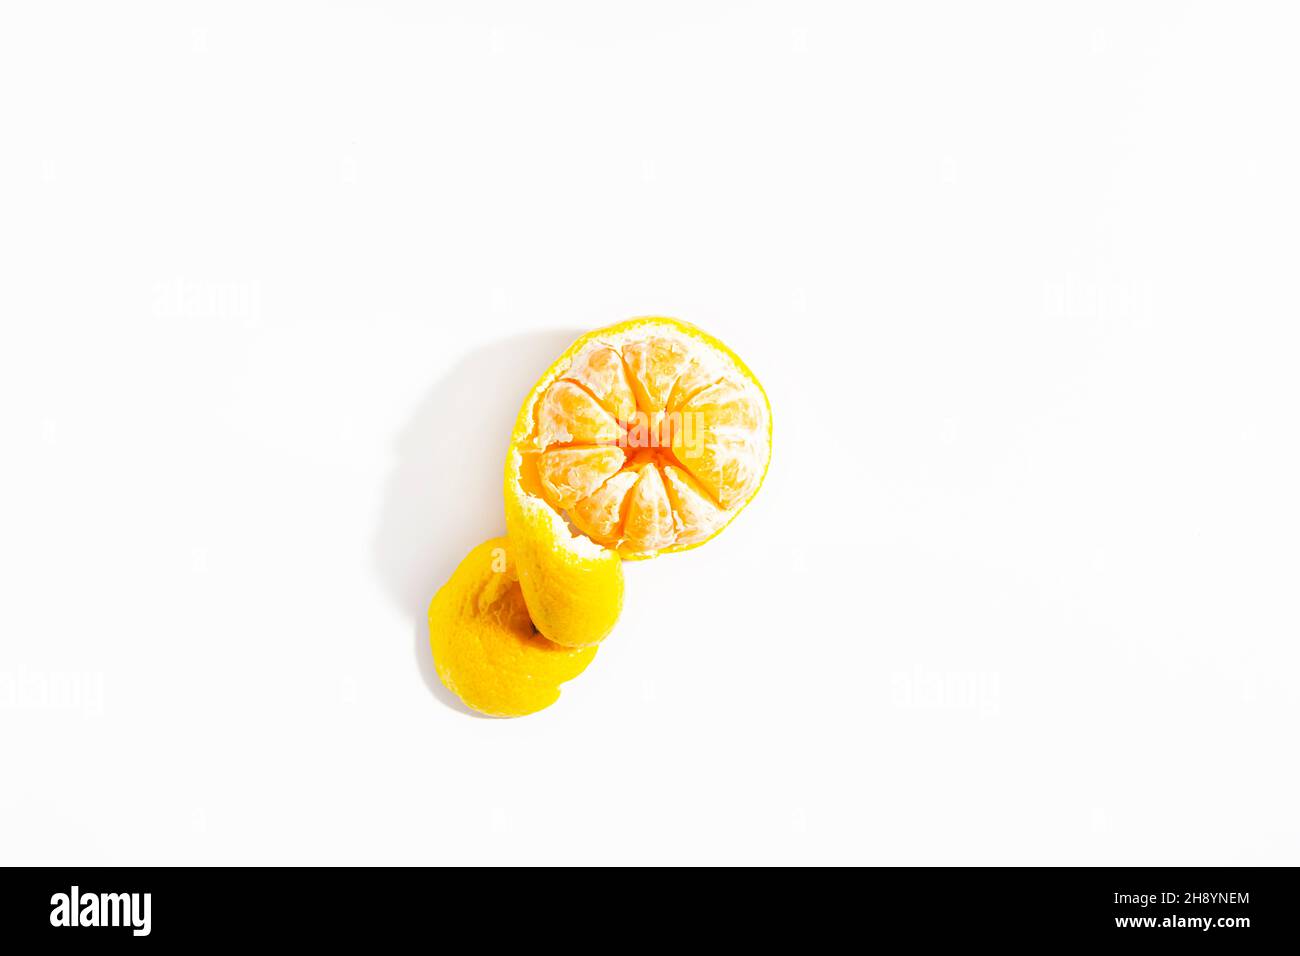 Tangerine half peeled with a peel in the shape of a spiral lies on a white background. Isolate. Lifestyle. Close-up. View from above. Horizontal photo. High quality photo Stock Photo